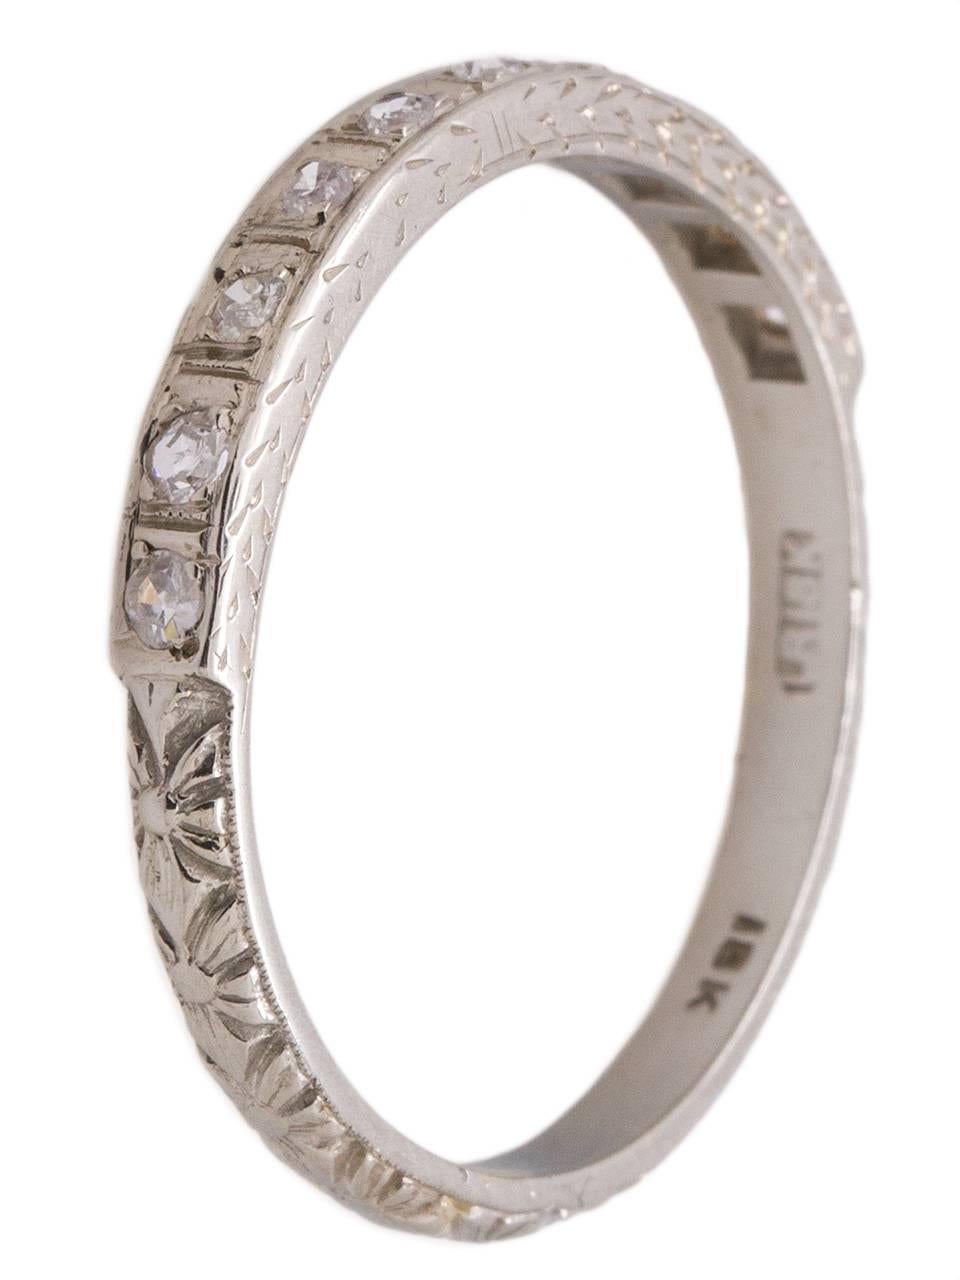 Vintage 18K white gold diamond wedding band containing ten bright and lively bead set single cut diamonds with a combined weigh of approxmiatley 0.20ct, SI2-I1/H-I (near colorless). Lovely hand engraved wheat pattern with romantic floral design.